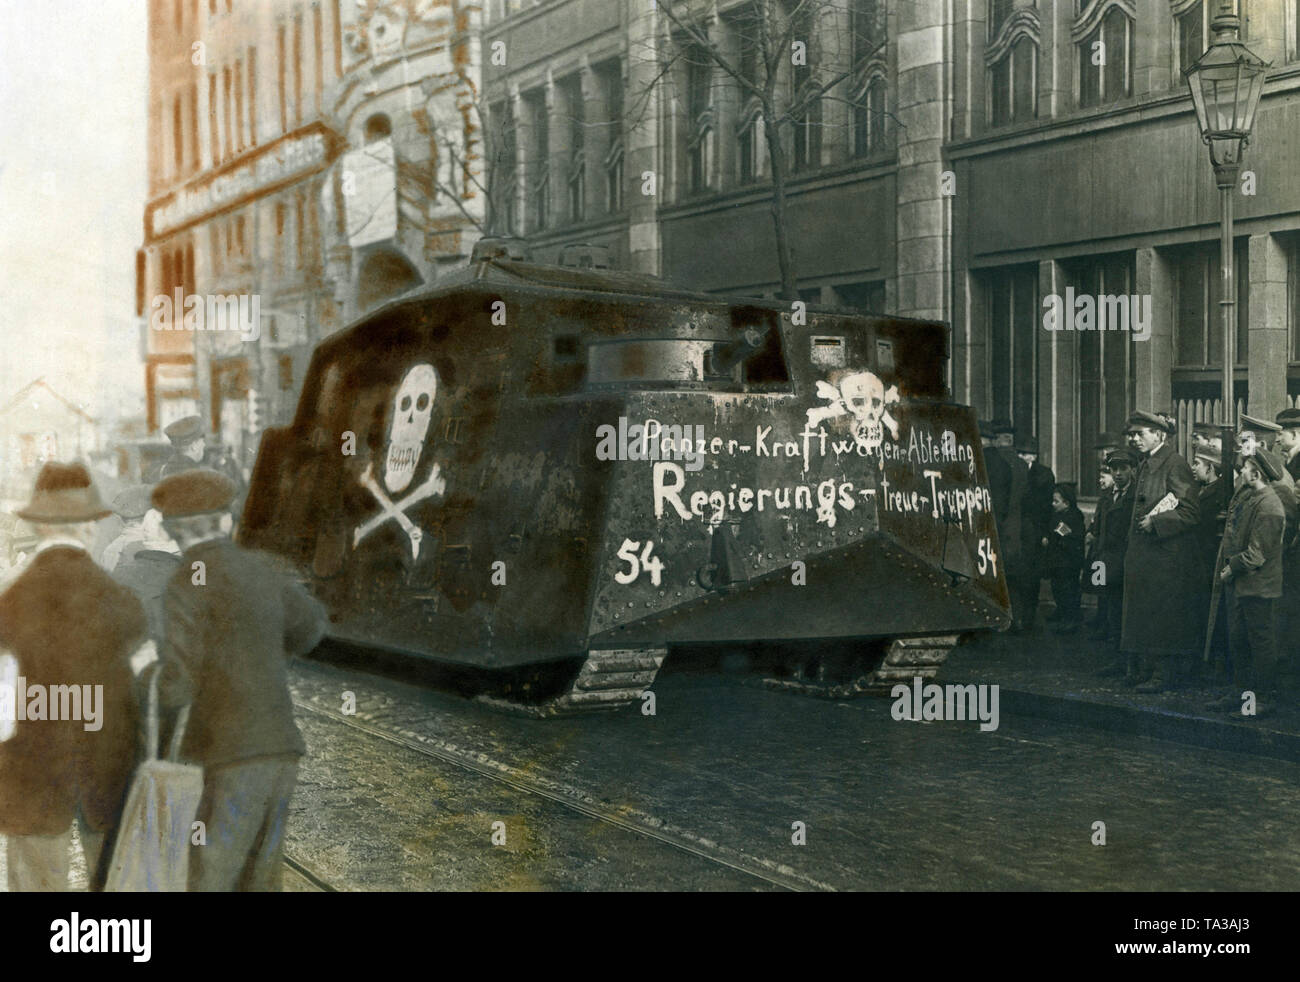 Freikorps units, commissioned by the Ebert government, suppressed the demonstrations and revolt of workers during the January uprising with artillery and tanks. Here, the A7V tank called 'Hedi' driving through a street in Berlin. Stock Photo